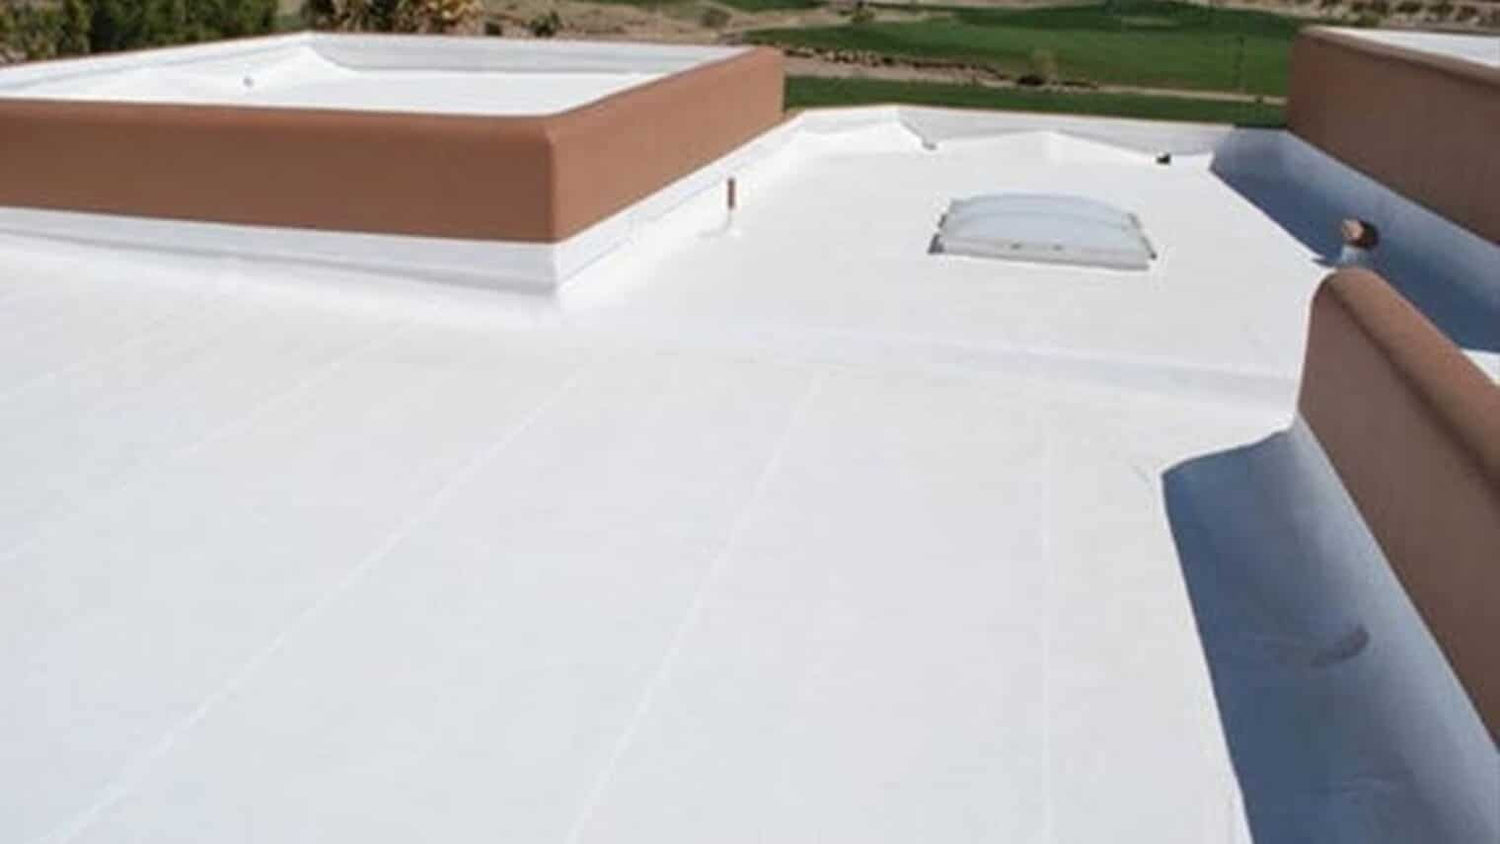 Stay cool with Star Cool Shield + Cool Roof Paint. Energy efficient, waterproof, BEE Certified ESCO.